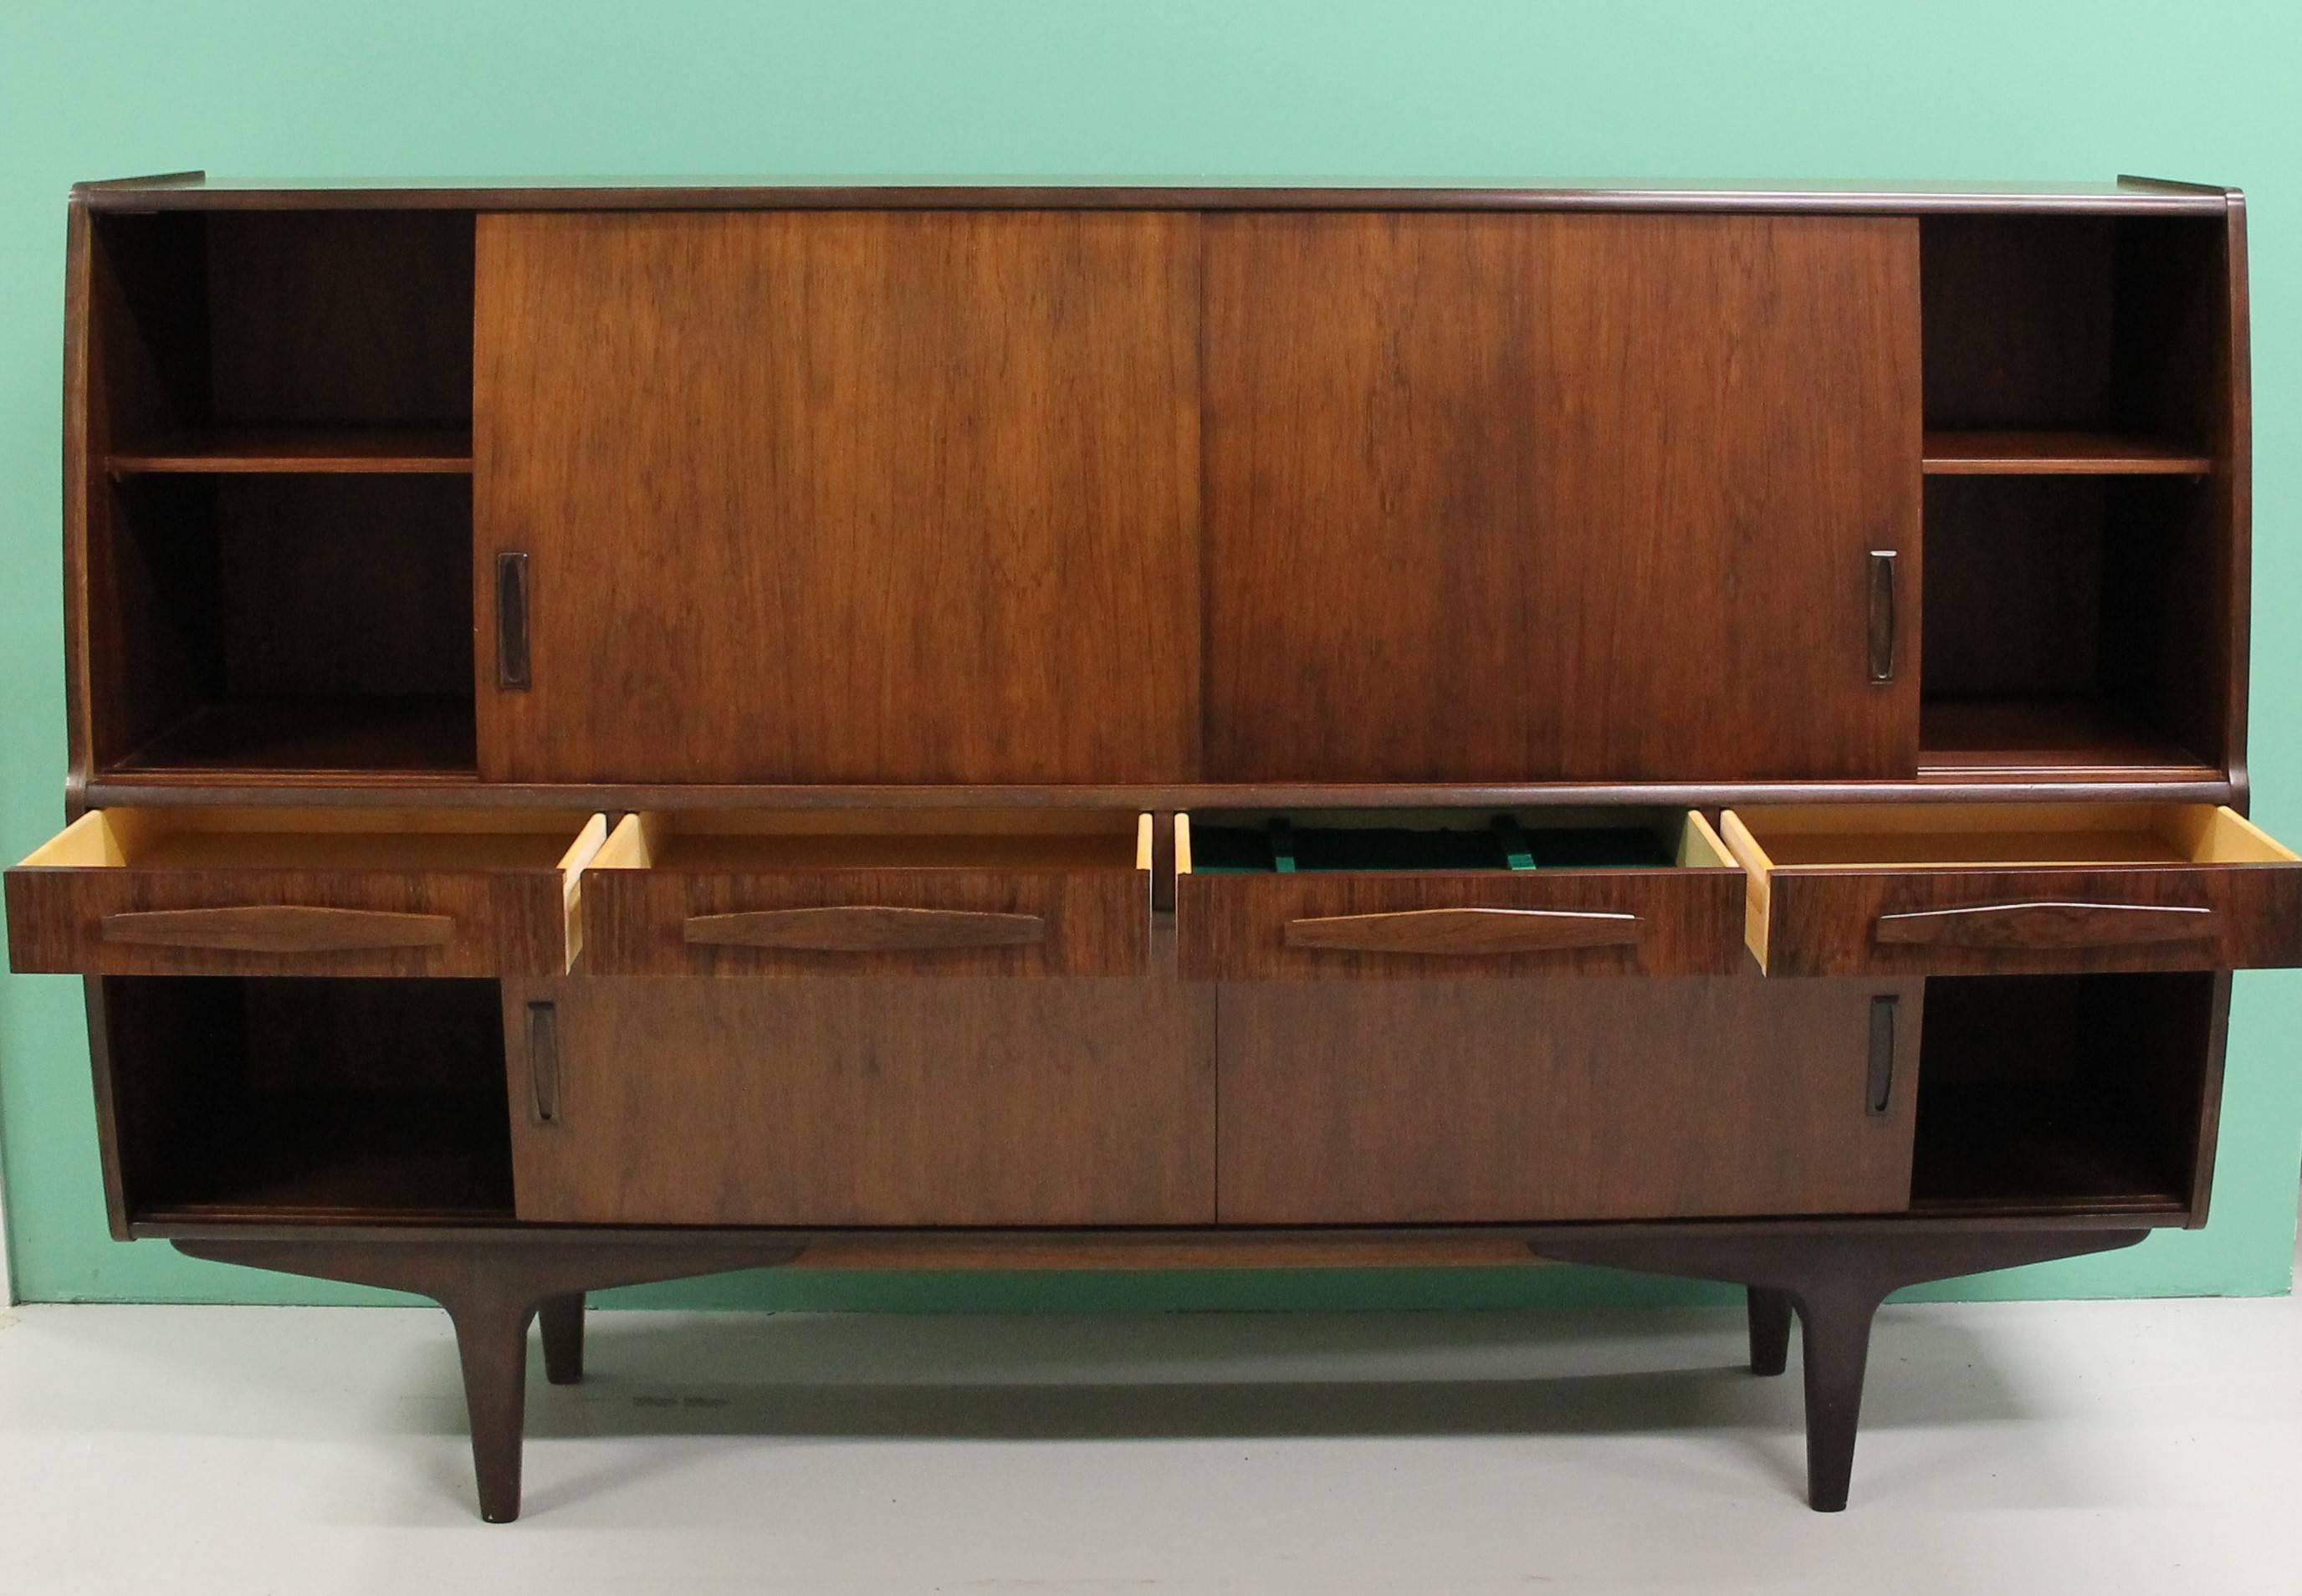 Denmark, 1950

1950s Poul M. Jessen rosewood sideboard, front with four drawers and six sliding doors.
 
Drawers include beautiful cutlery drawer.
Behind the upper sliding door you will find the cocktail bar and two extra drawers.
